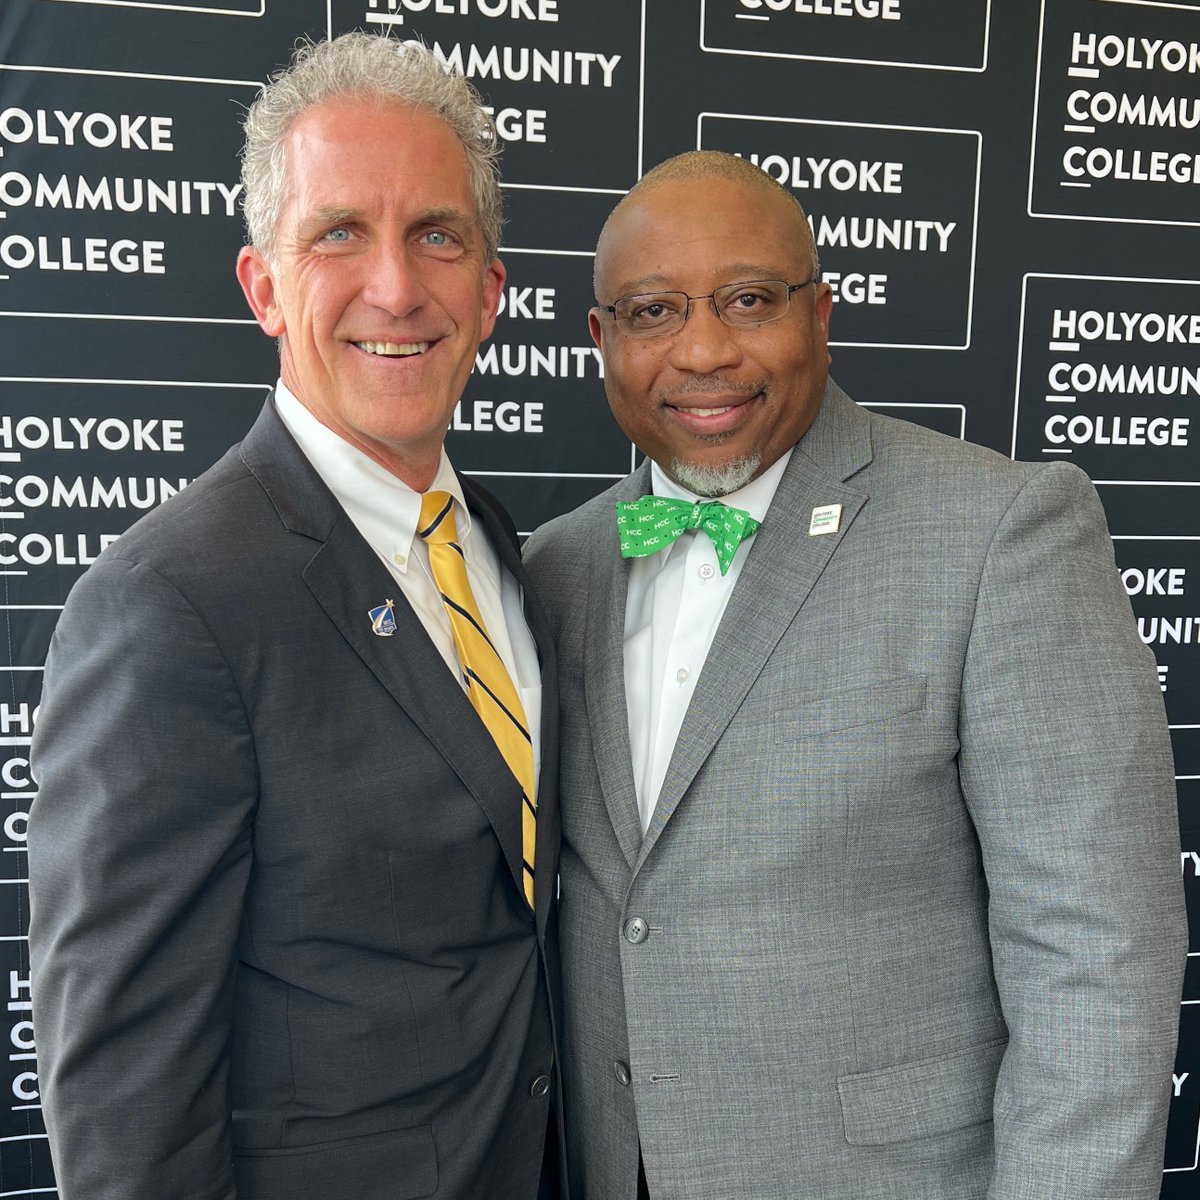 Congratulations to our friends at @HolyokeCC on the inauguration of President George Timmons,Ph.D.